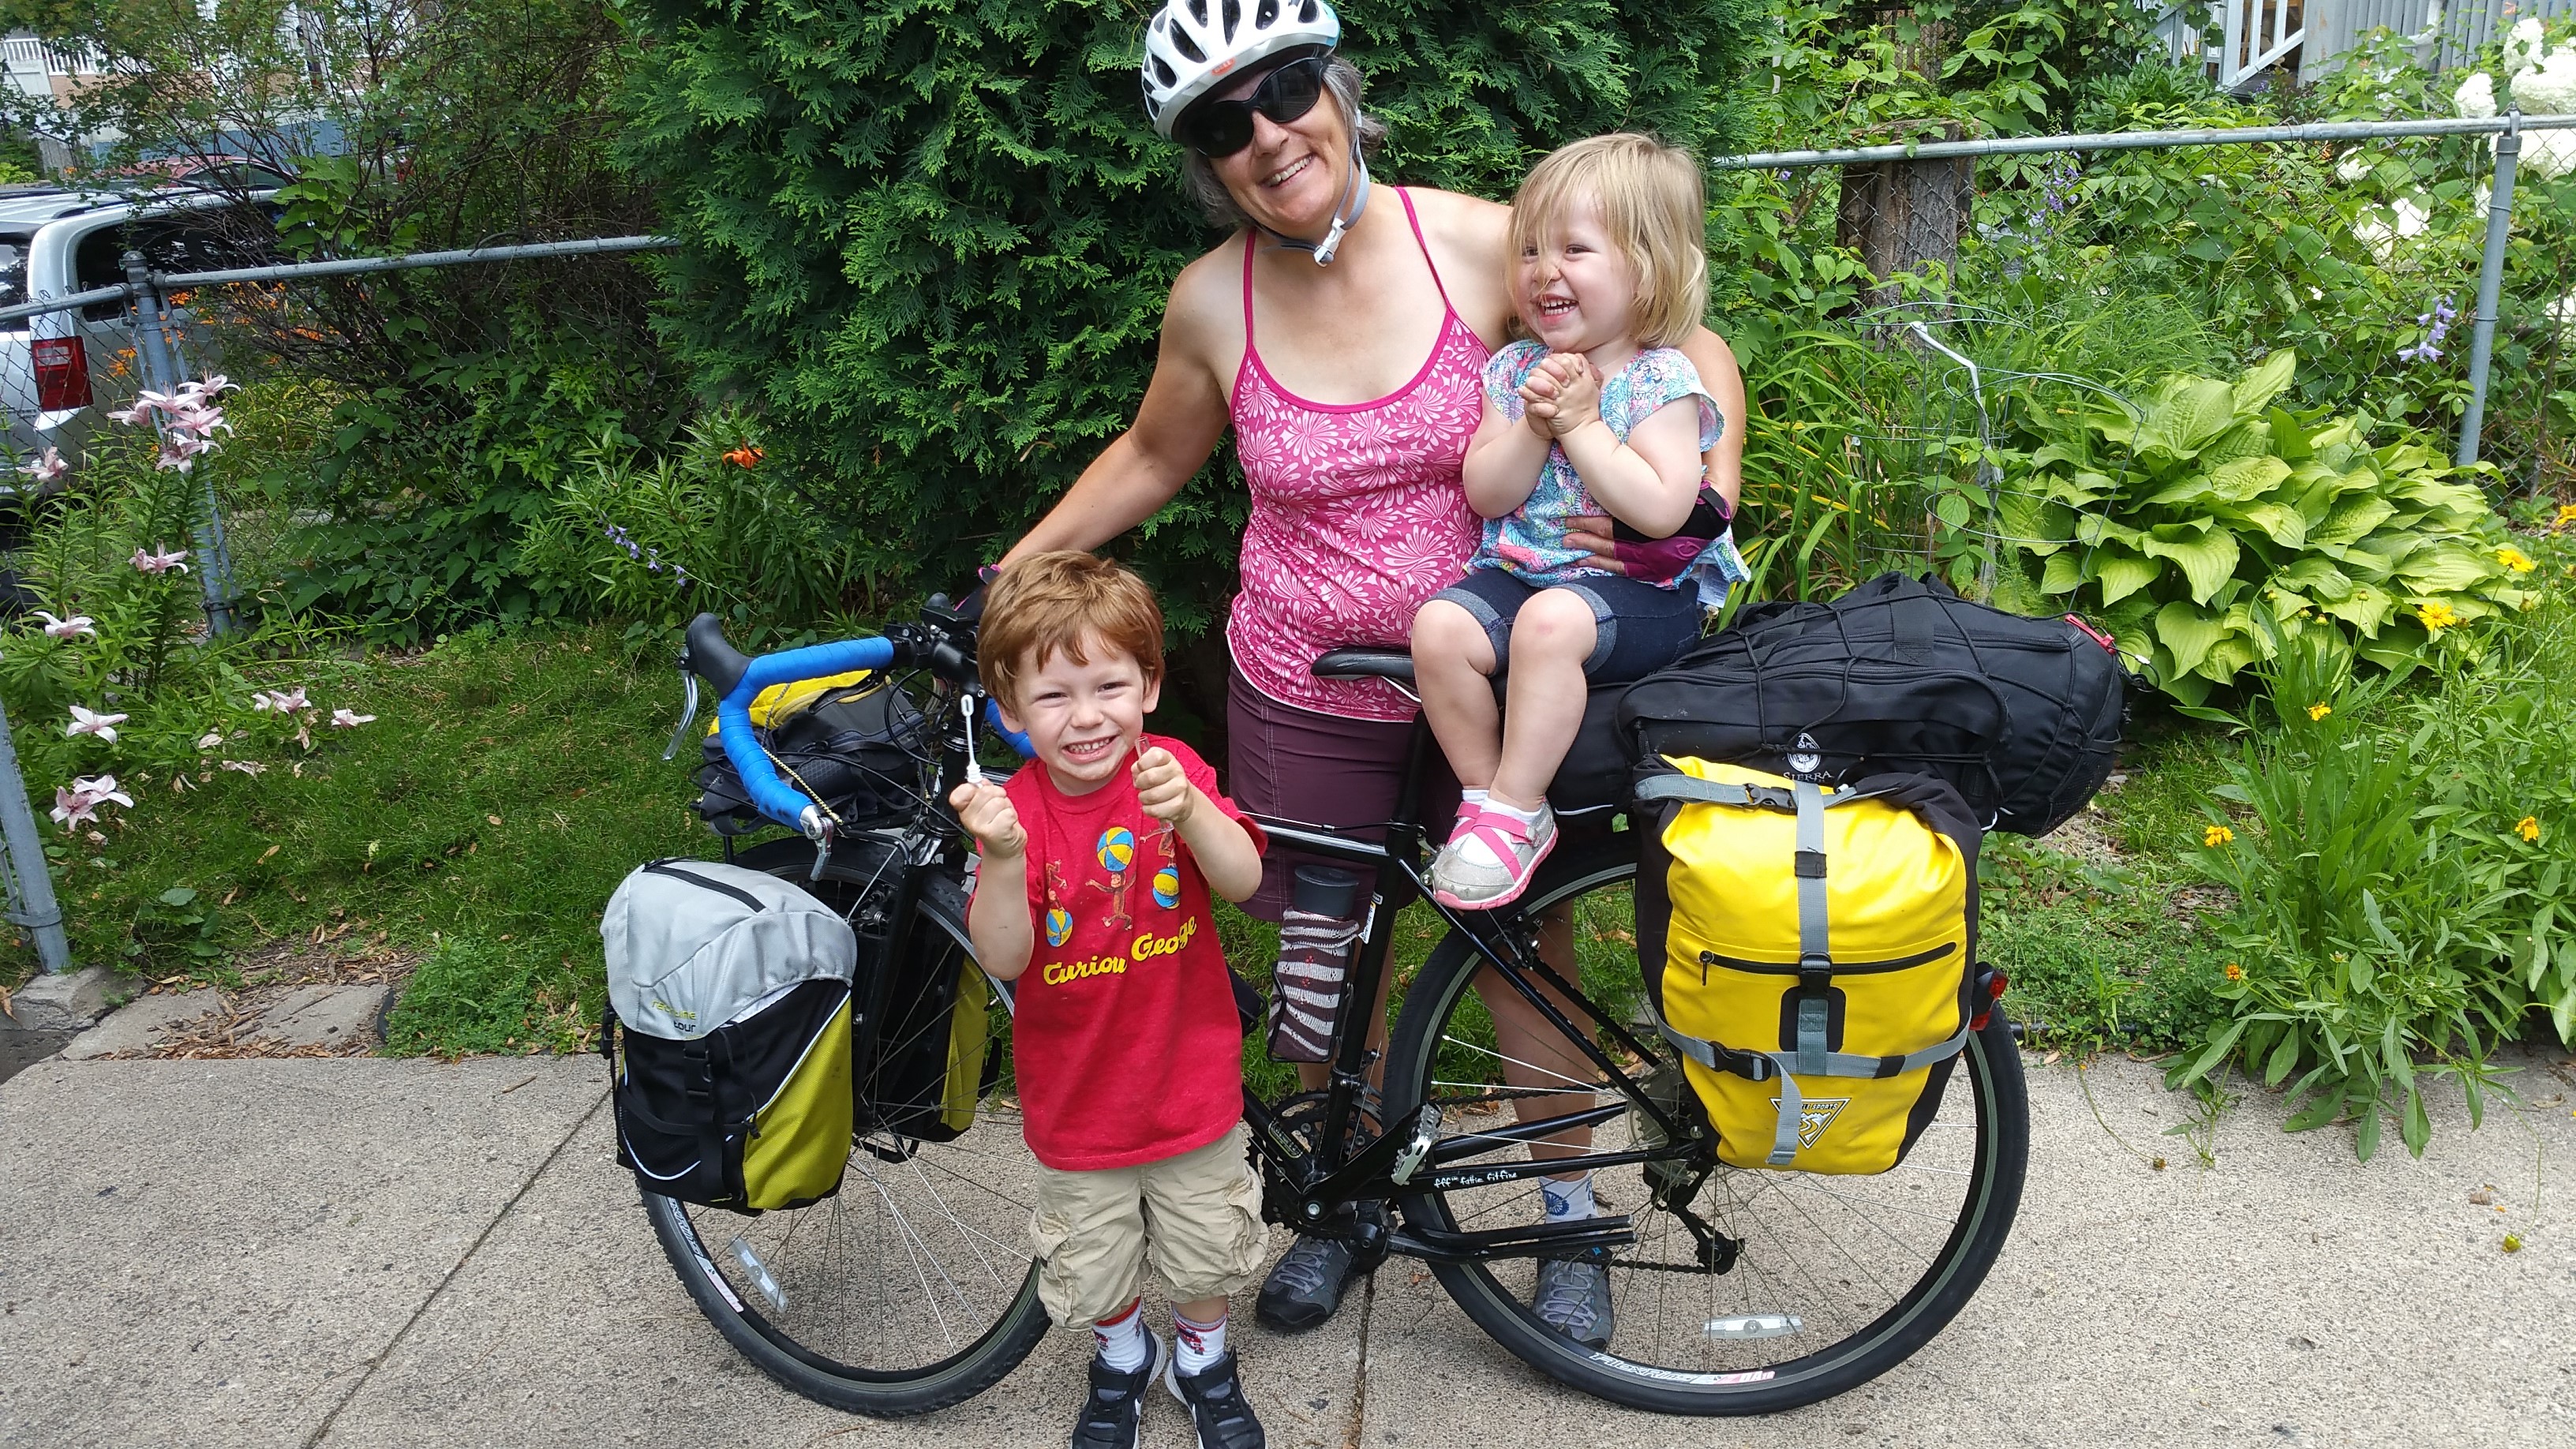 Kaia with her grandkids geared up for the Habitat 500 bike ride